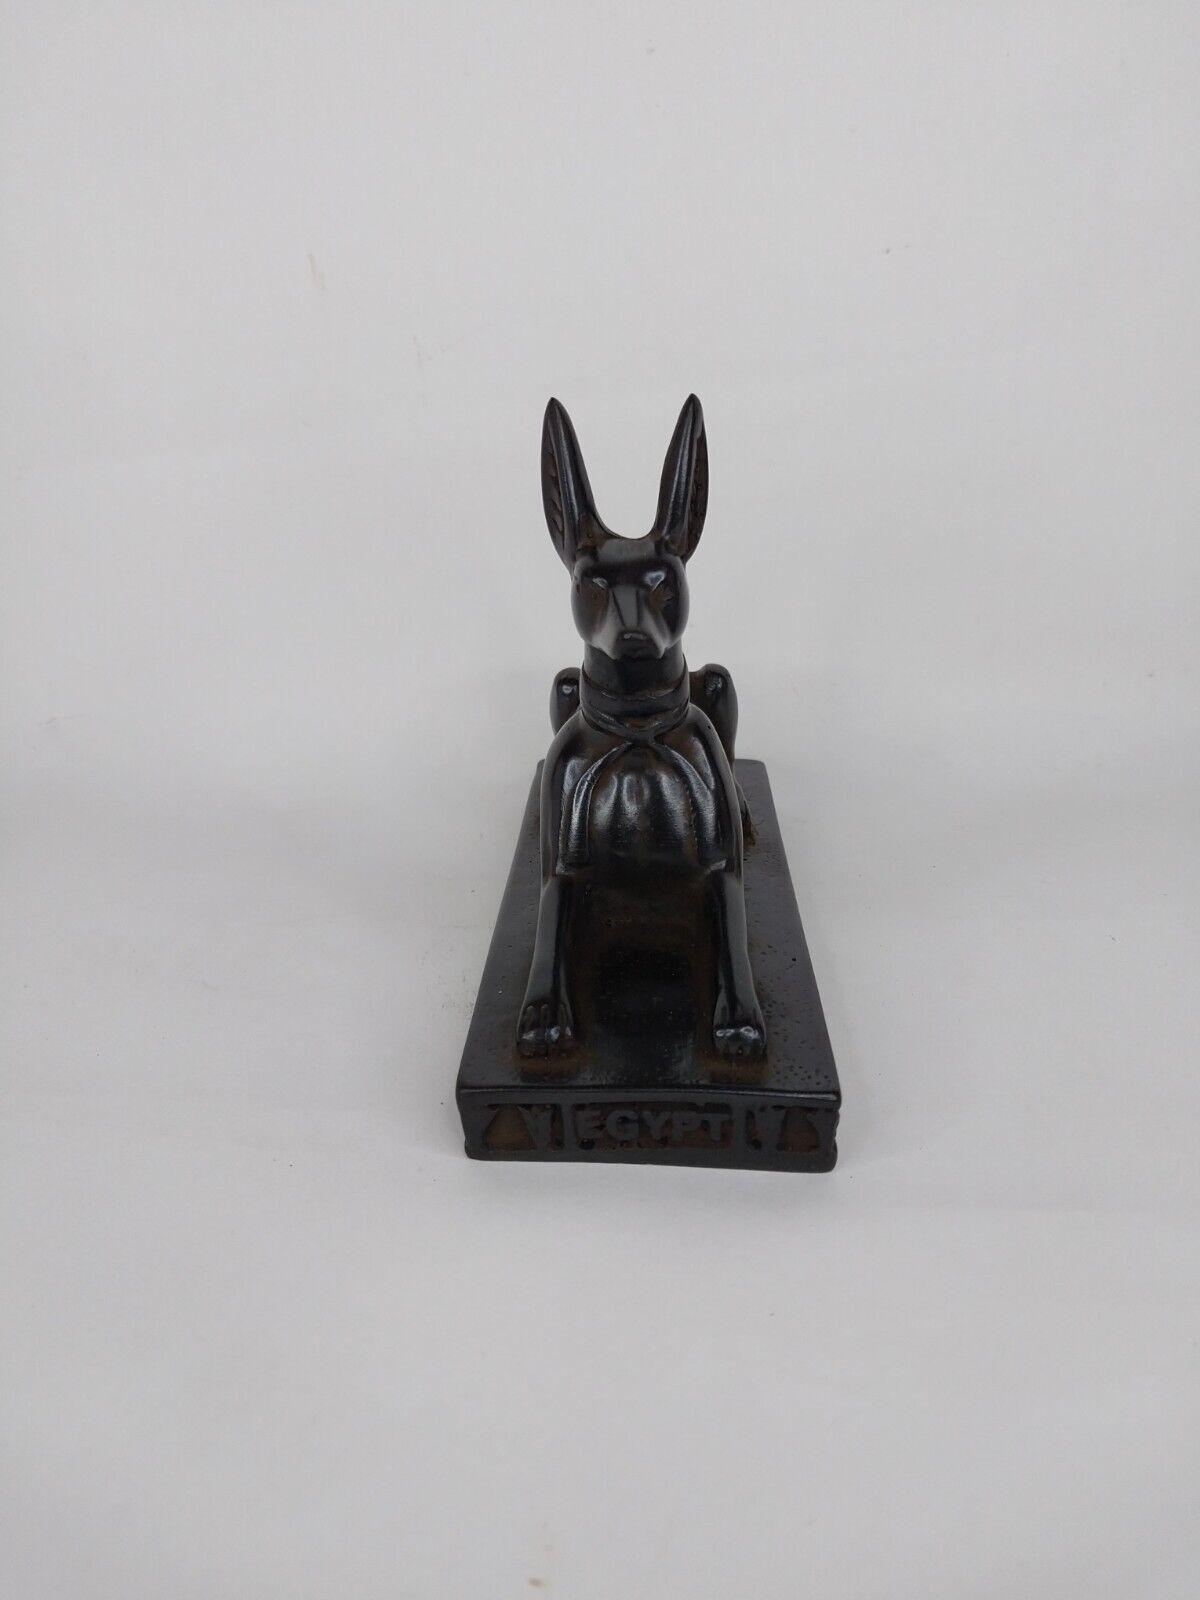 UNIQUE ANCIENT EGYPTIAN ANTIQUE Anubis Jackal Statue Stone Made in Egypt